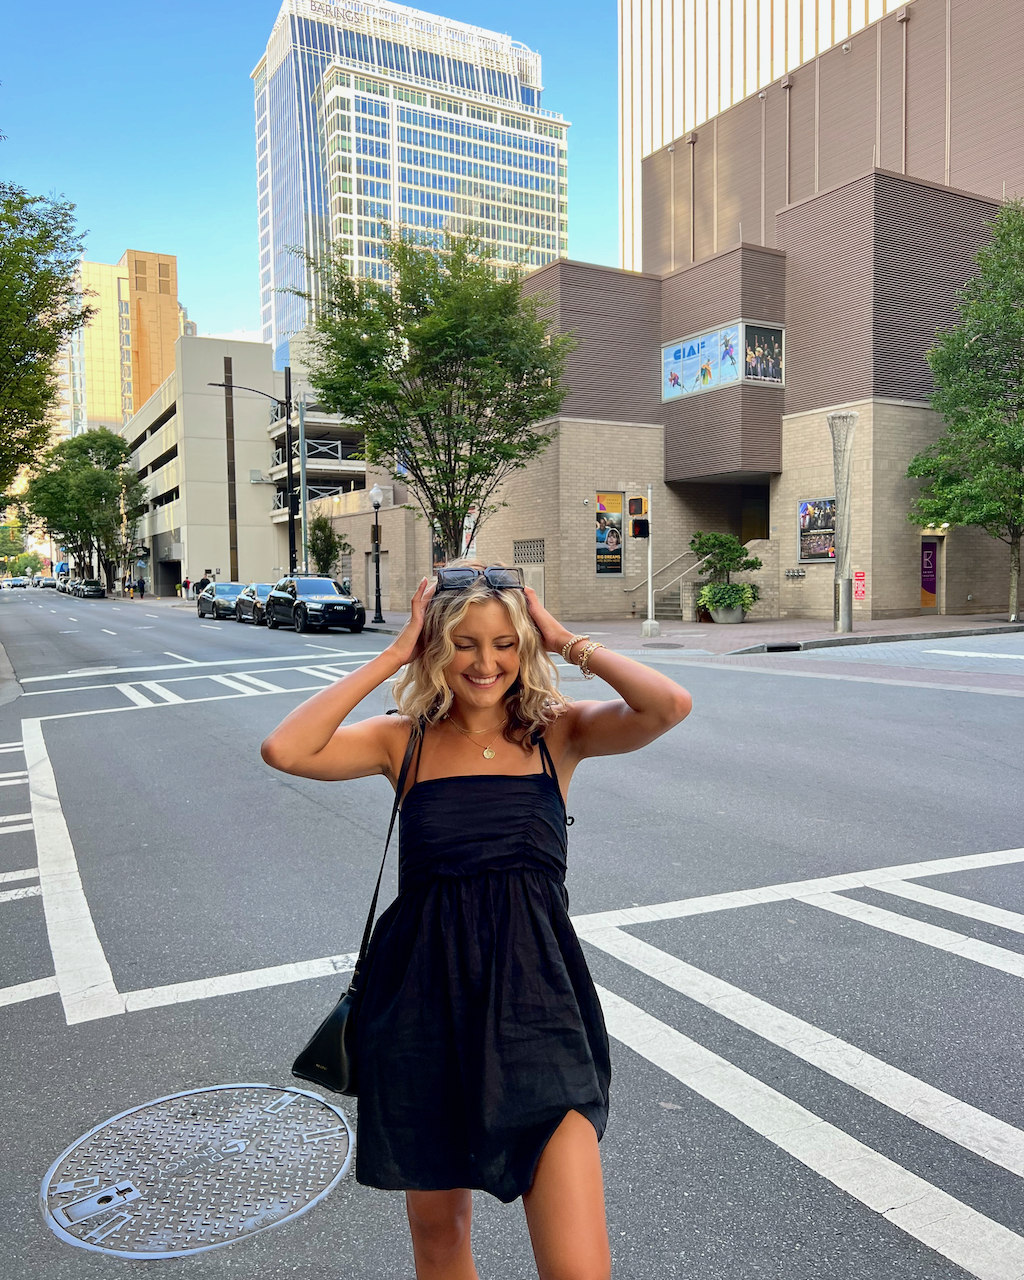 Charlotte, North Carolina Travel Guide || Spring 2023 2 Day Itinerary, Restaurant Recommendations & Outfit Ideas 